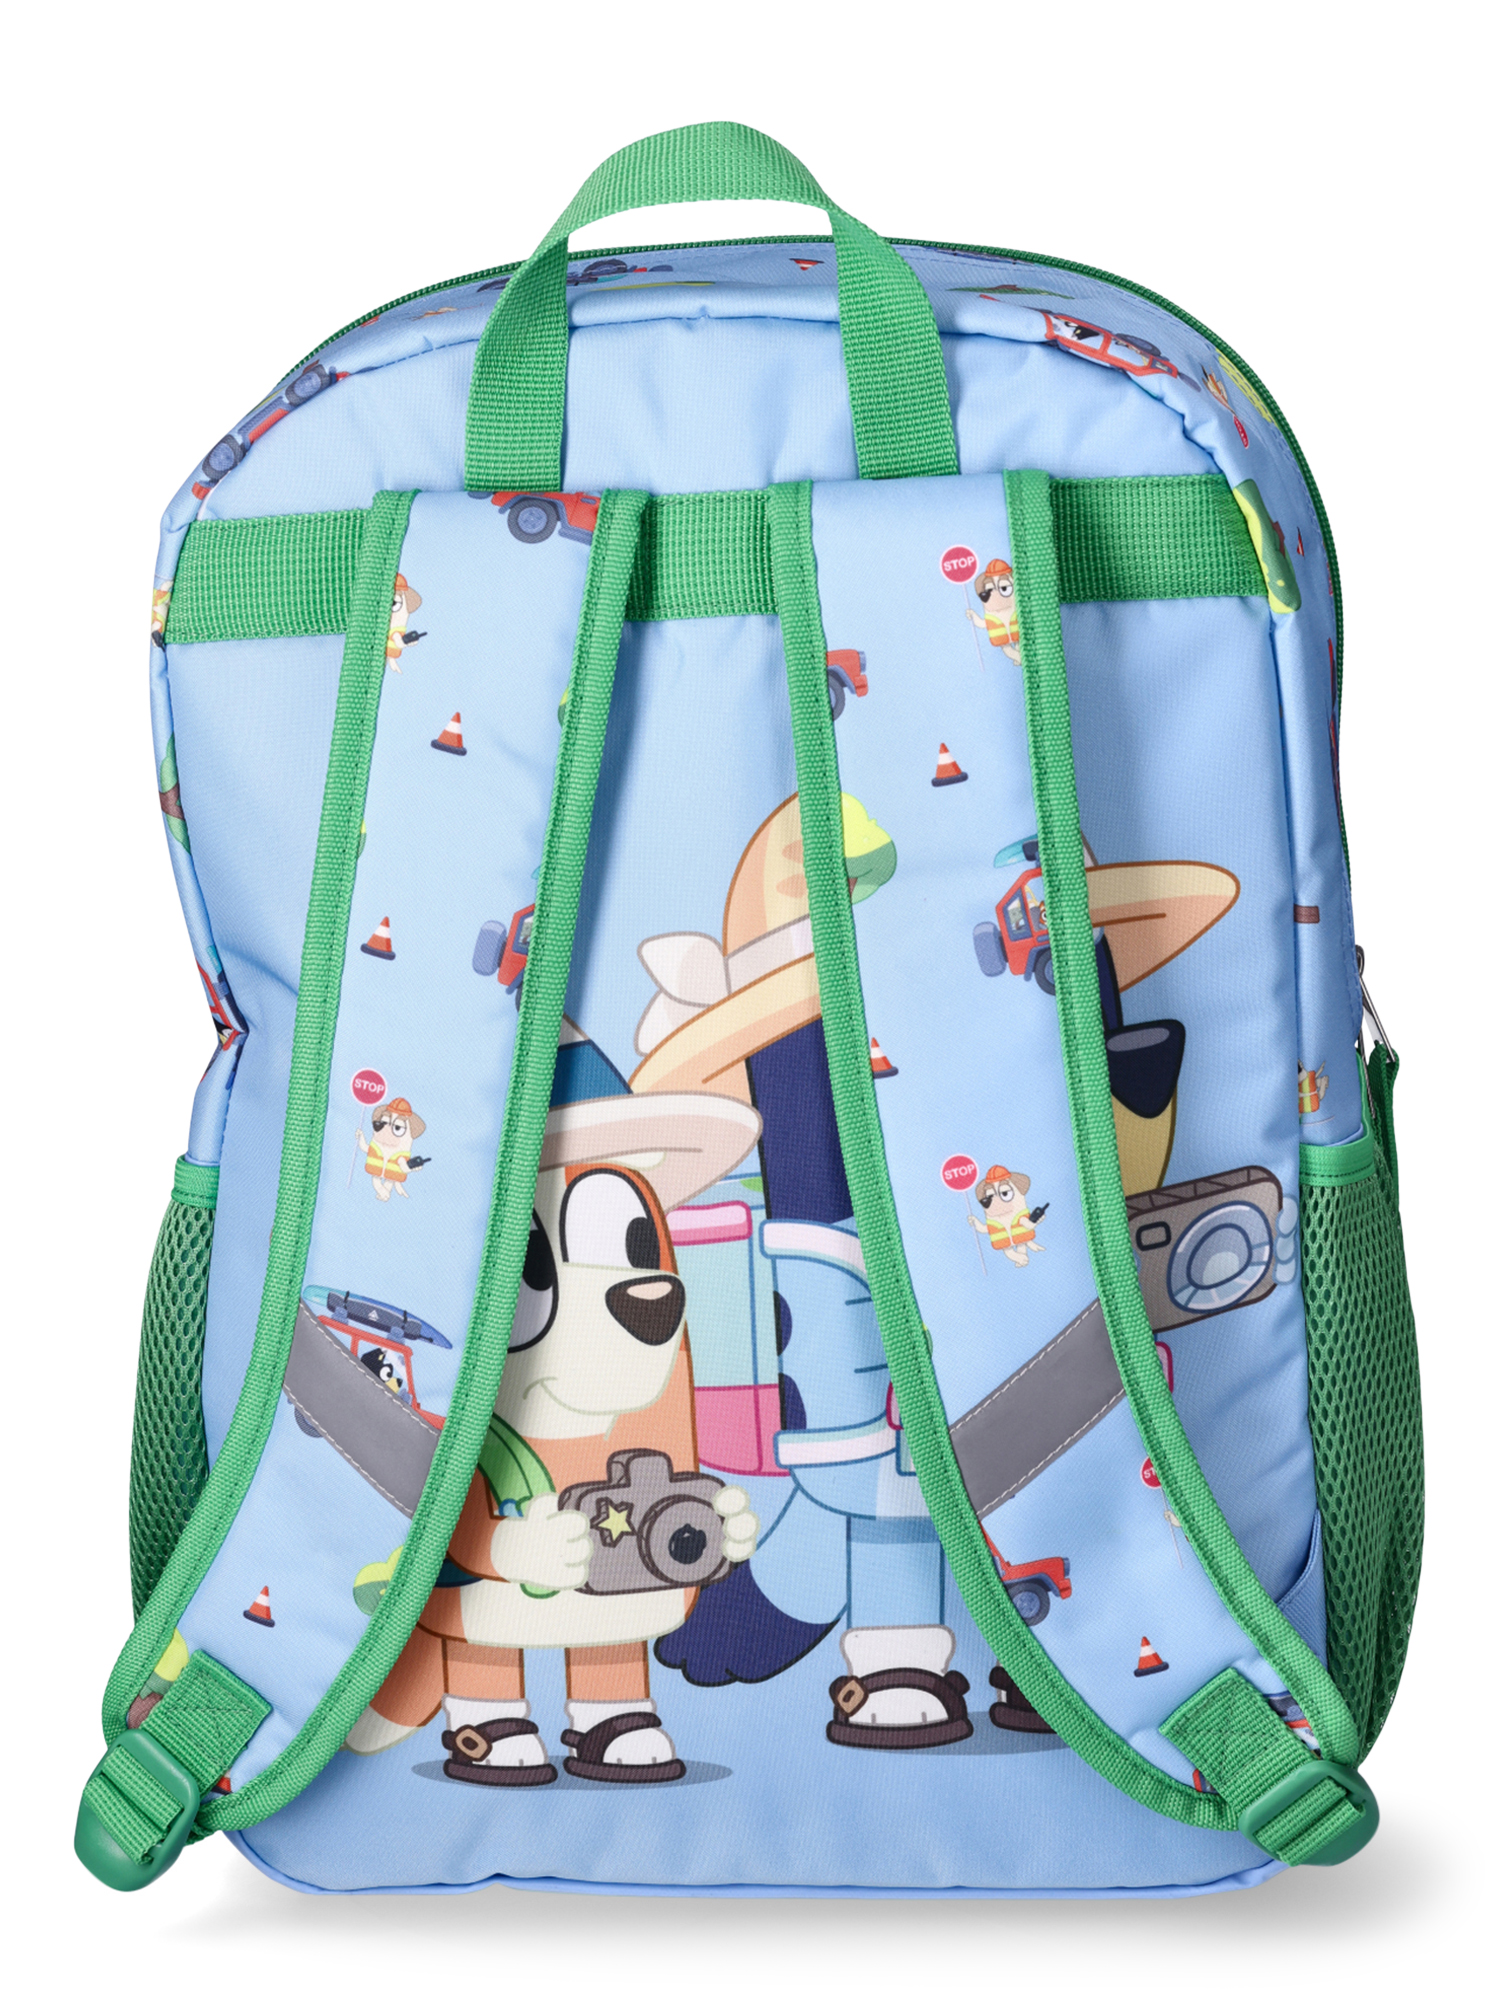 BBC Bluey Family Trip Children’s Laptop Backpack with Lunch Bag, 2-Piece Set - image 3 of 8